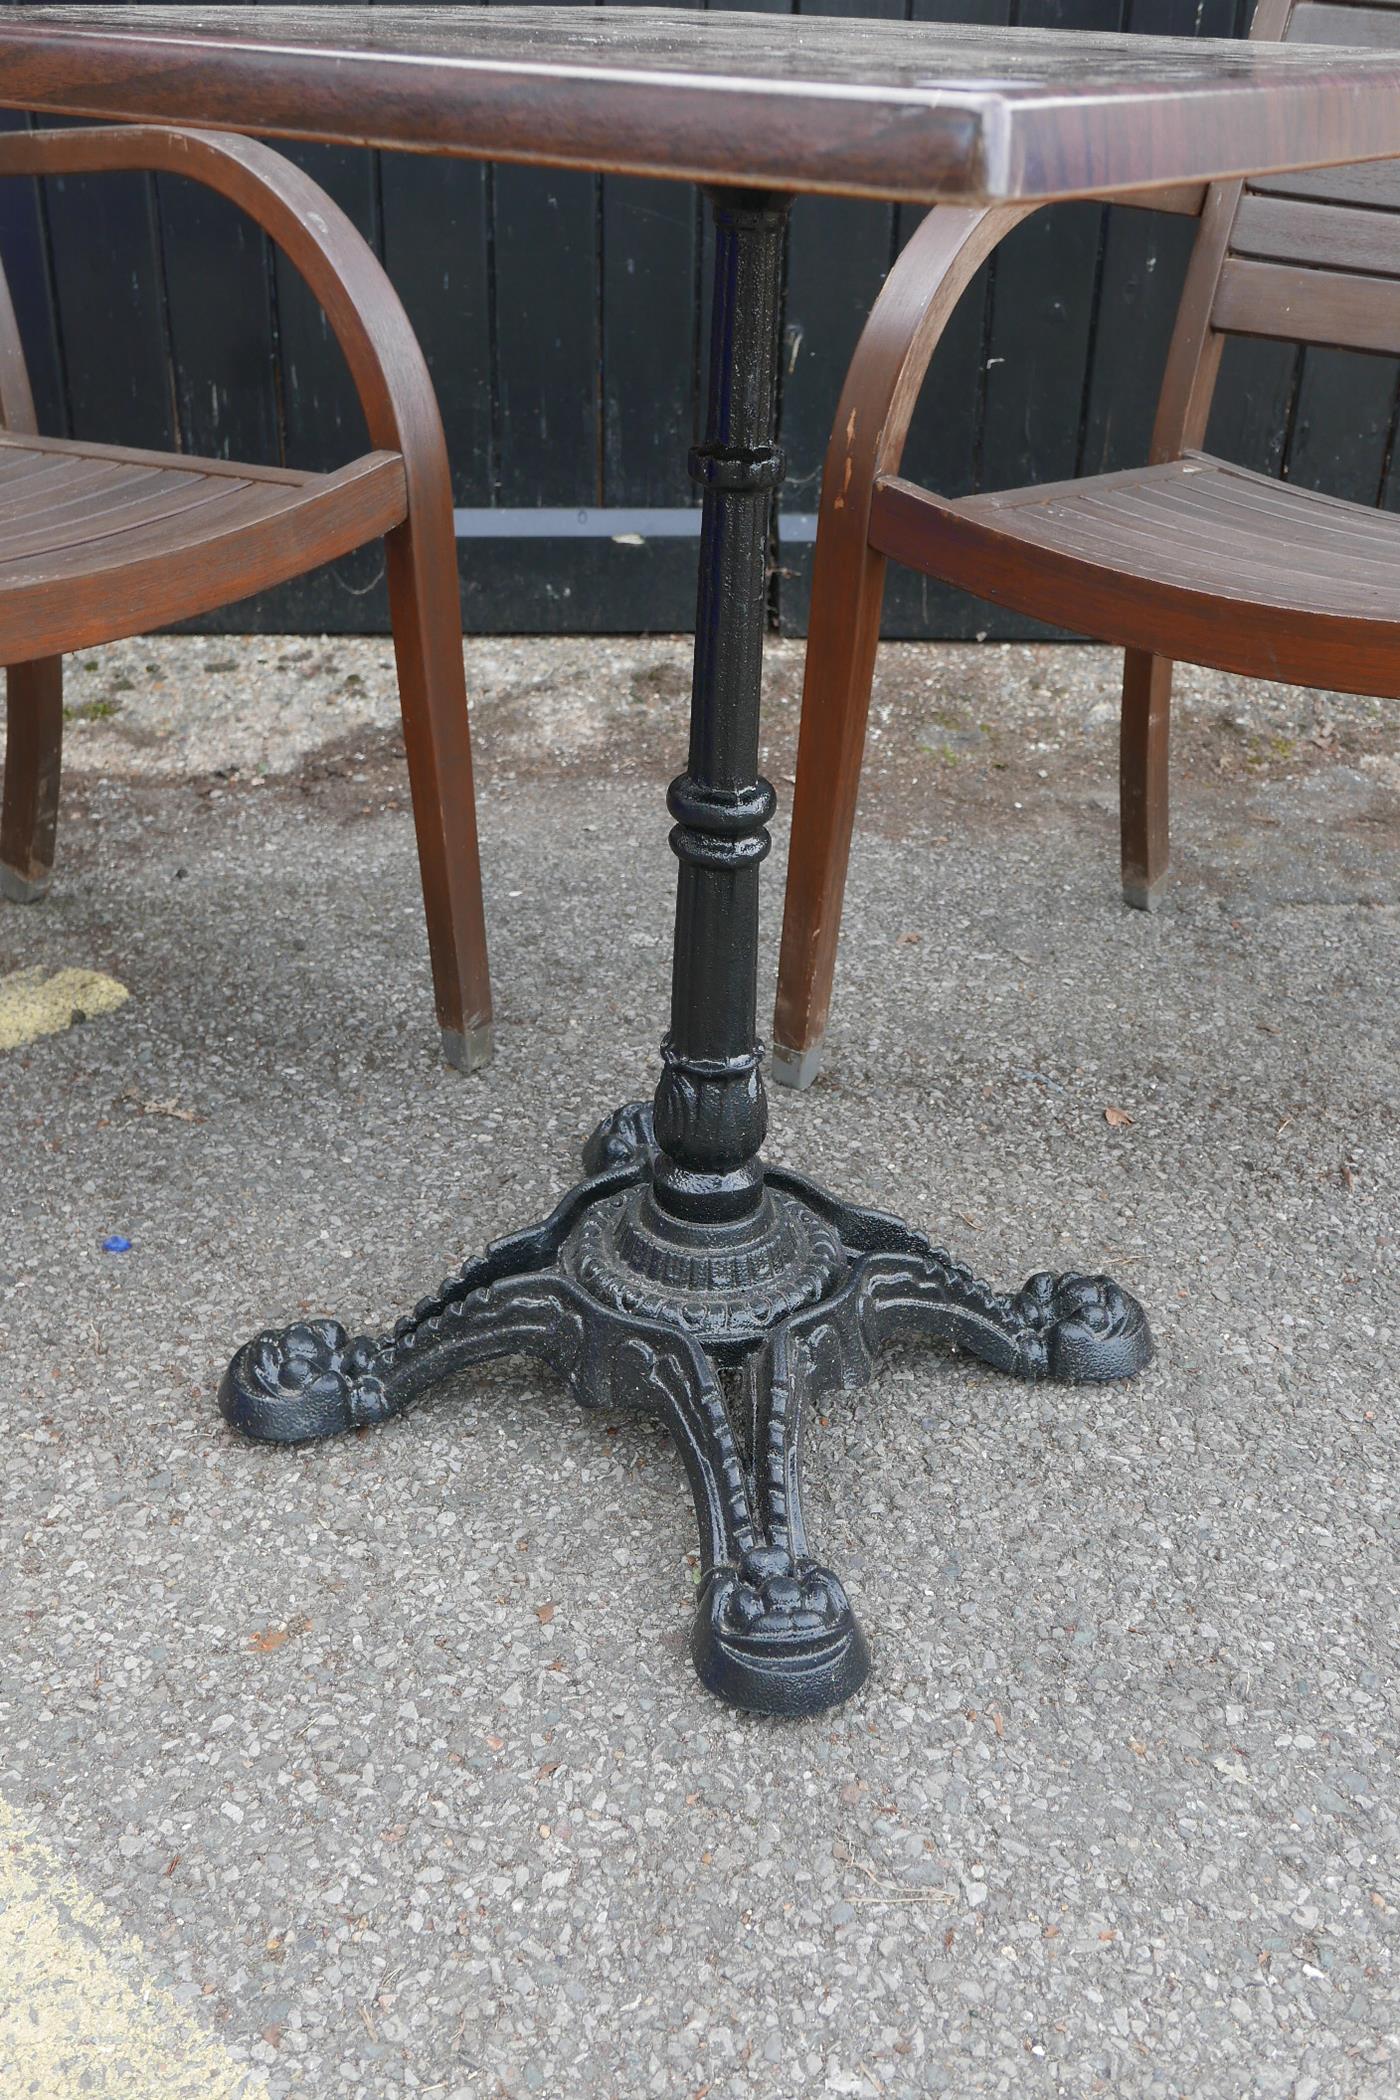 Two teak garden elbow chairs and a wrought iron and plastic bistro table, 23" x 23", 29" high - Image 2 of 3